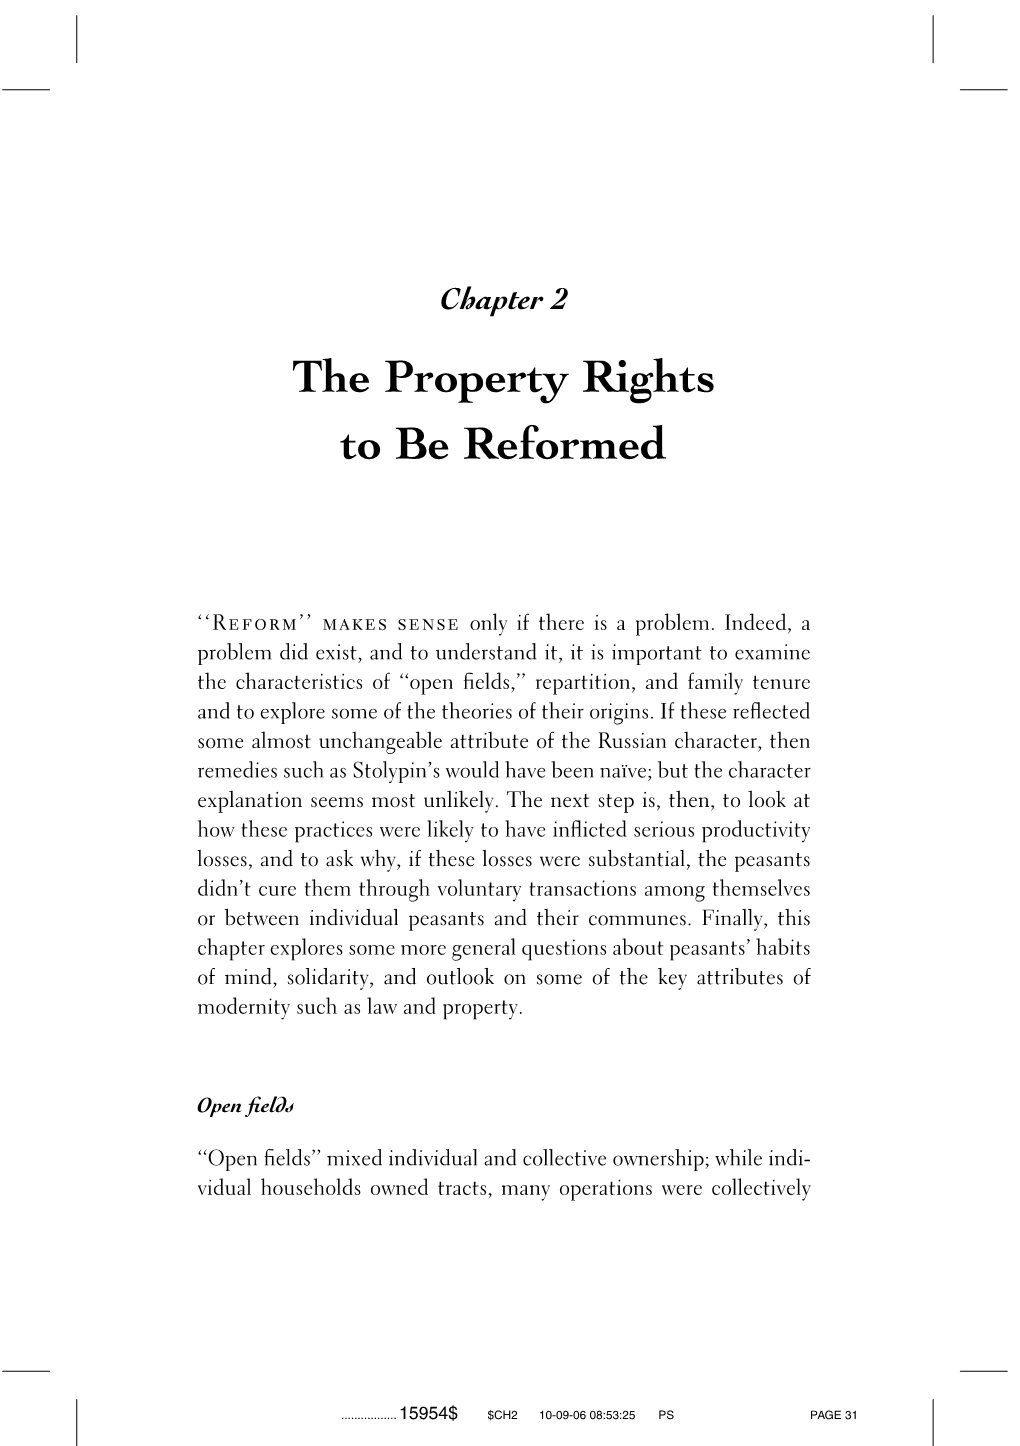 The Property Rights to Be Reformed